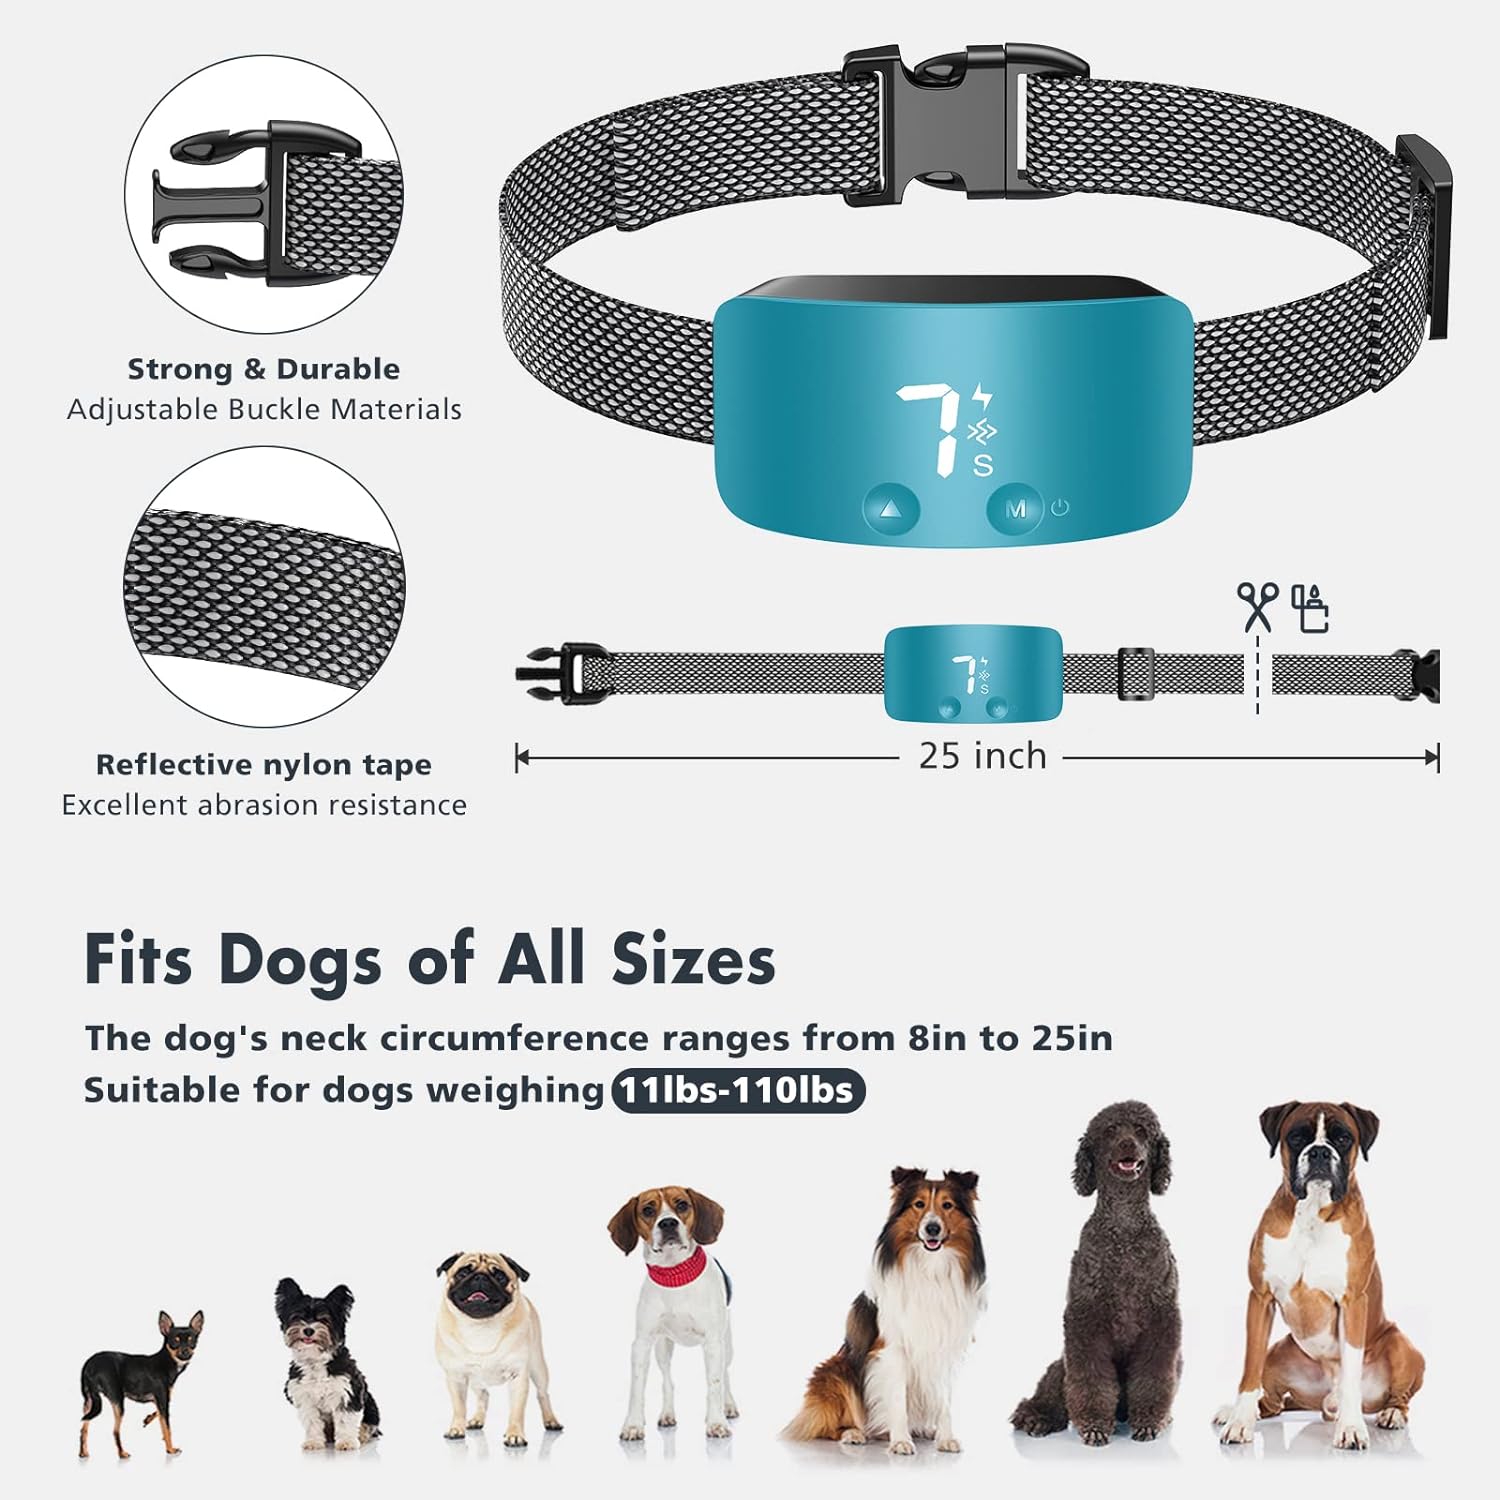 NBJU Bark Collar for Dogs,Rechargeable Anti Barking Training Collar with 7 Adjustable Sensitivity and Intensity Beep Vibration for Small Medium Large Dogs (Blackish